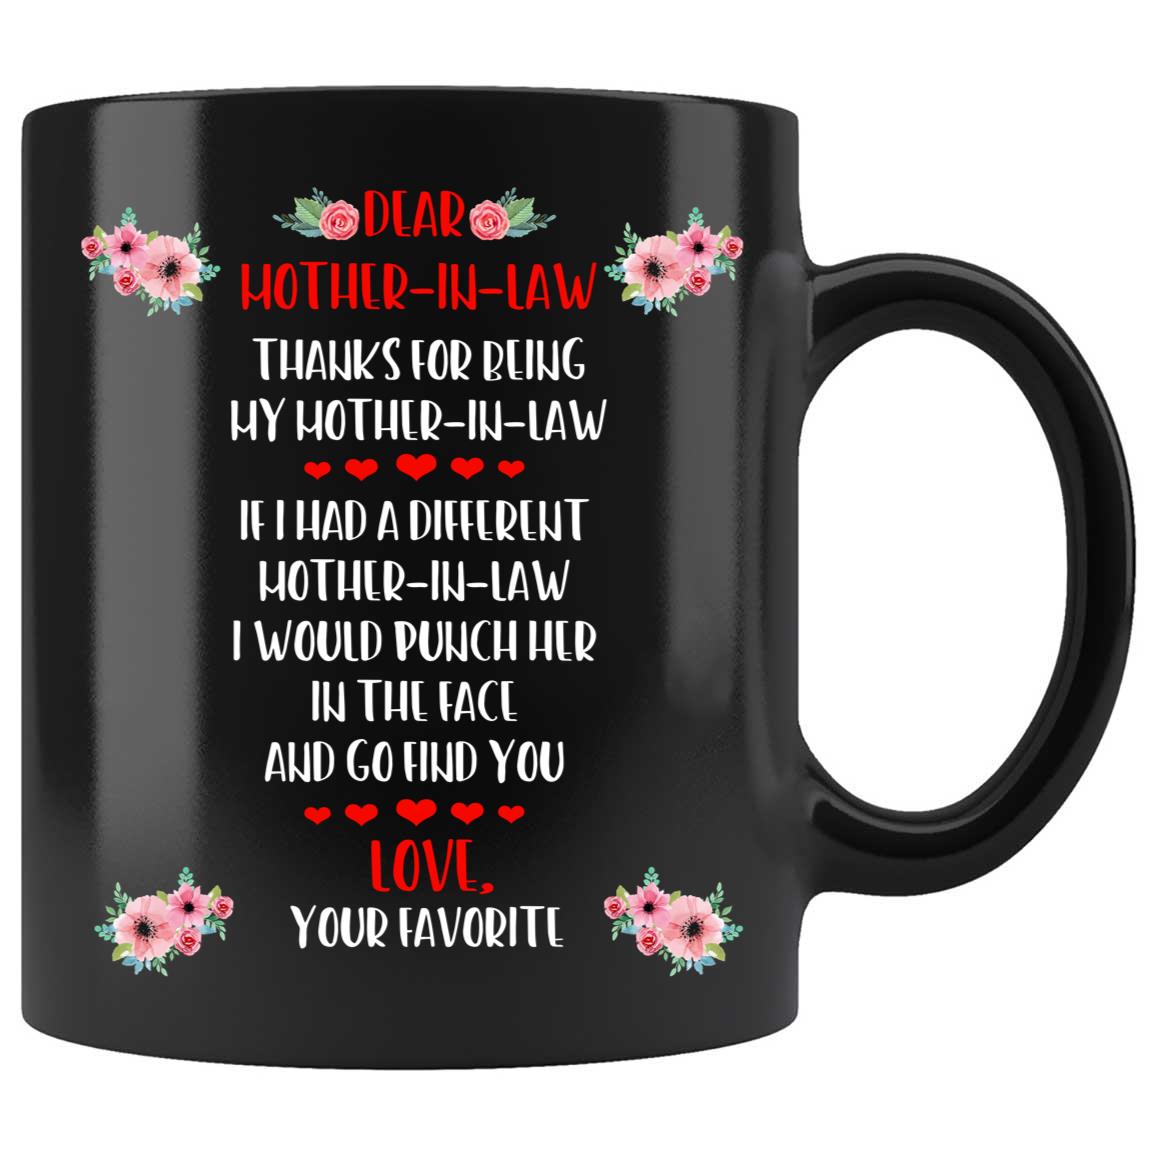 Skitongifts Coffee Mug Funny Ceramic Novelty NH06012022 - Dear Mother In Law From Kids Son Daughter In Law Ubacg75